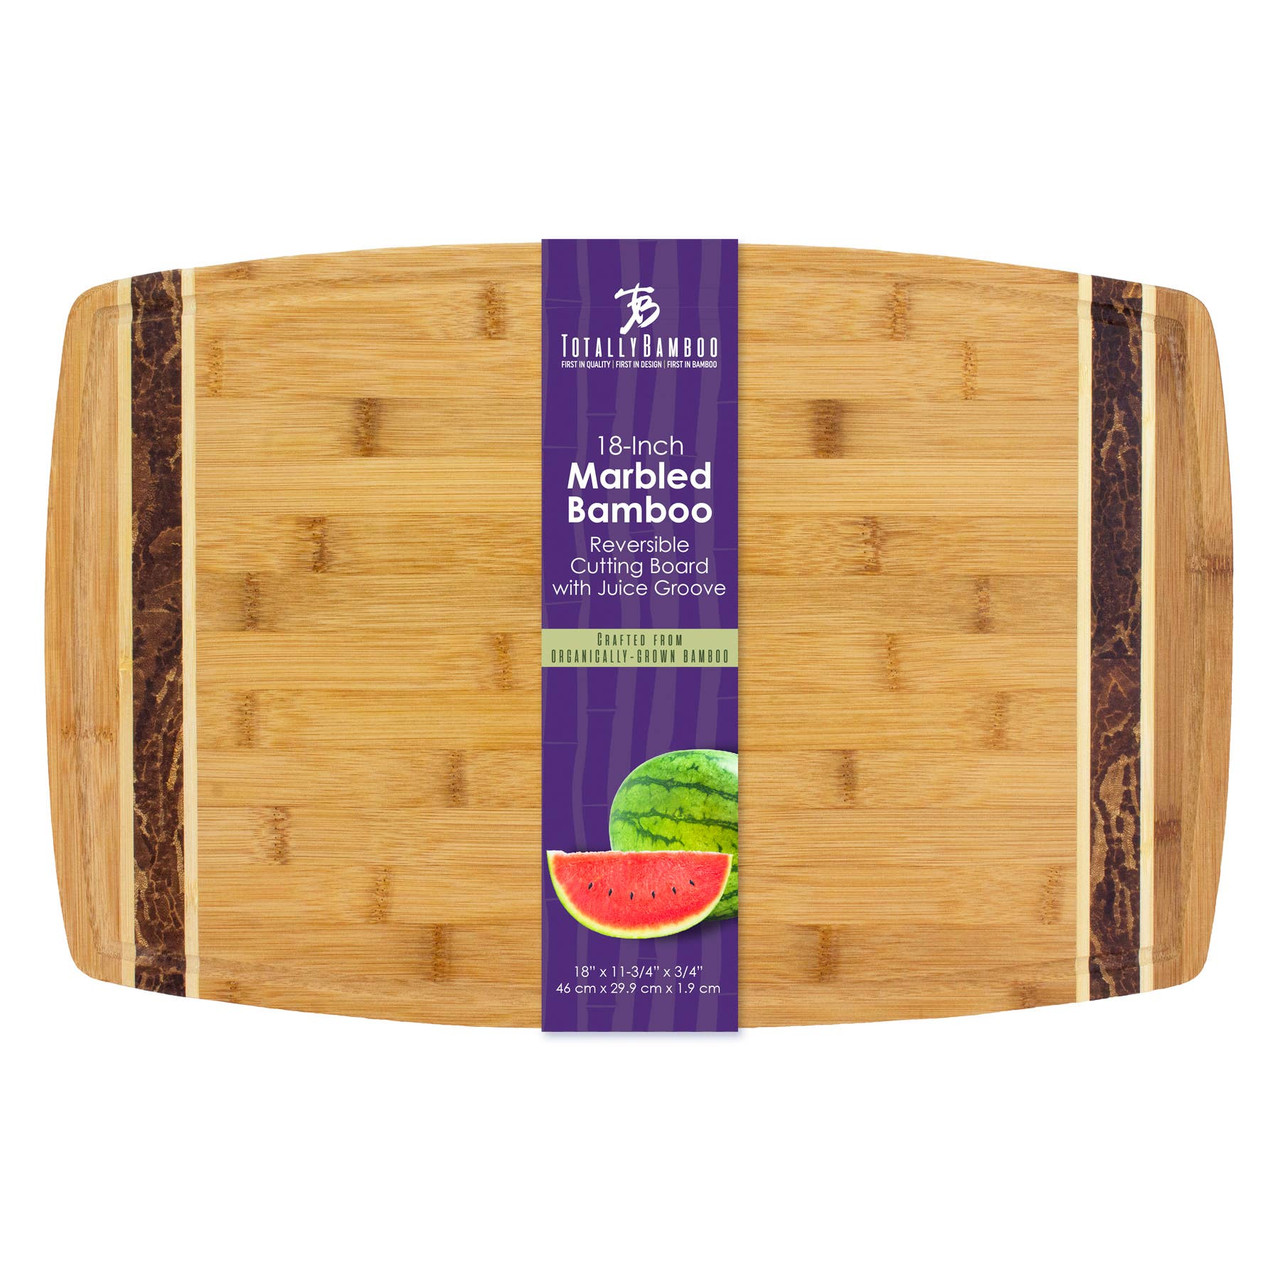 Totally Bamboo Marbled Bamboo Cutting Board, 18-inch